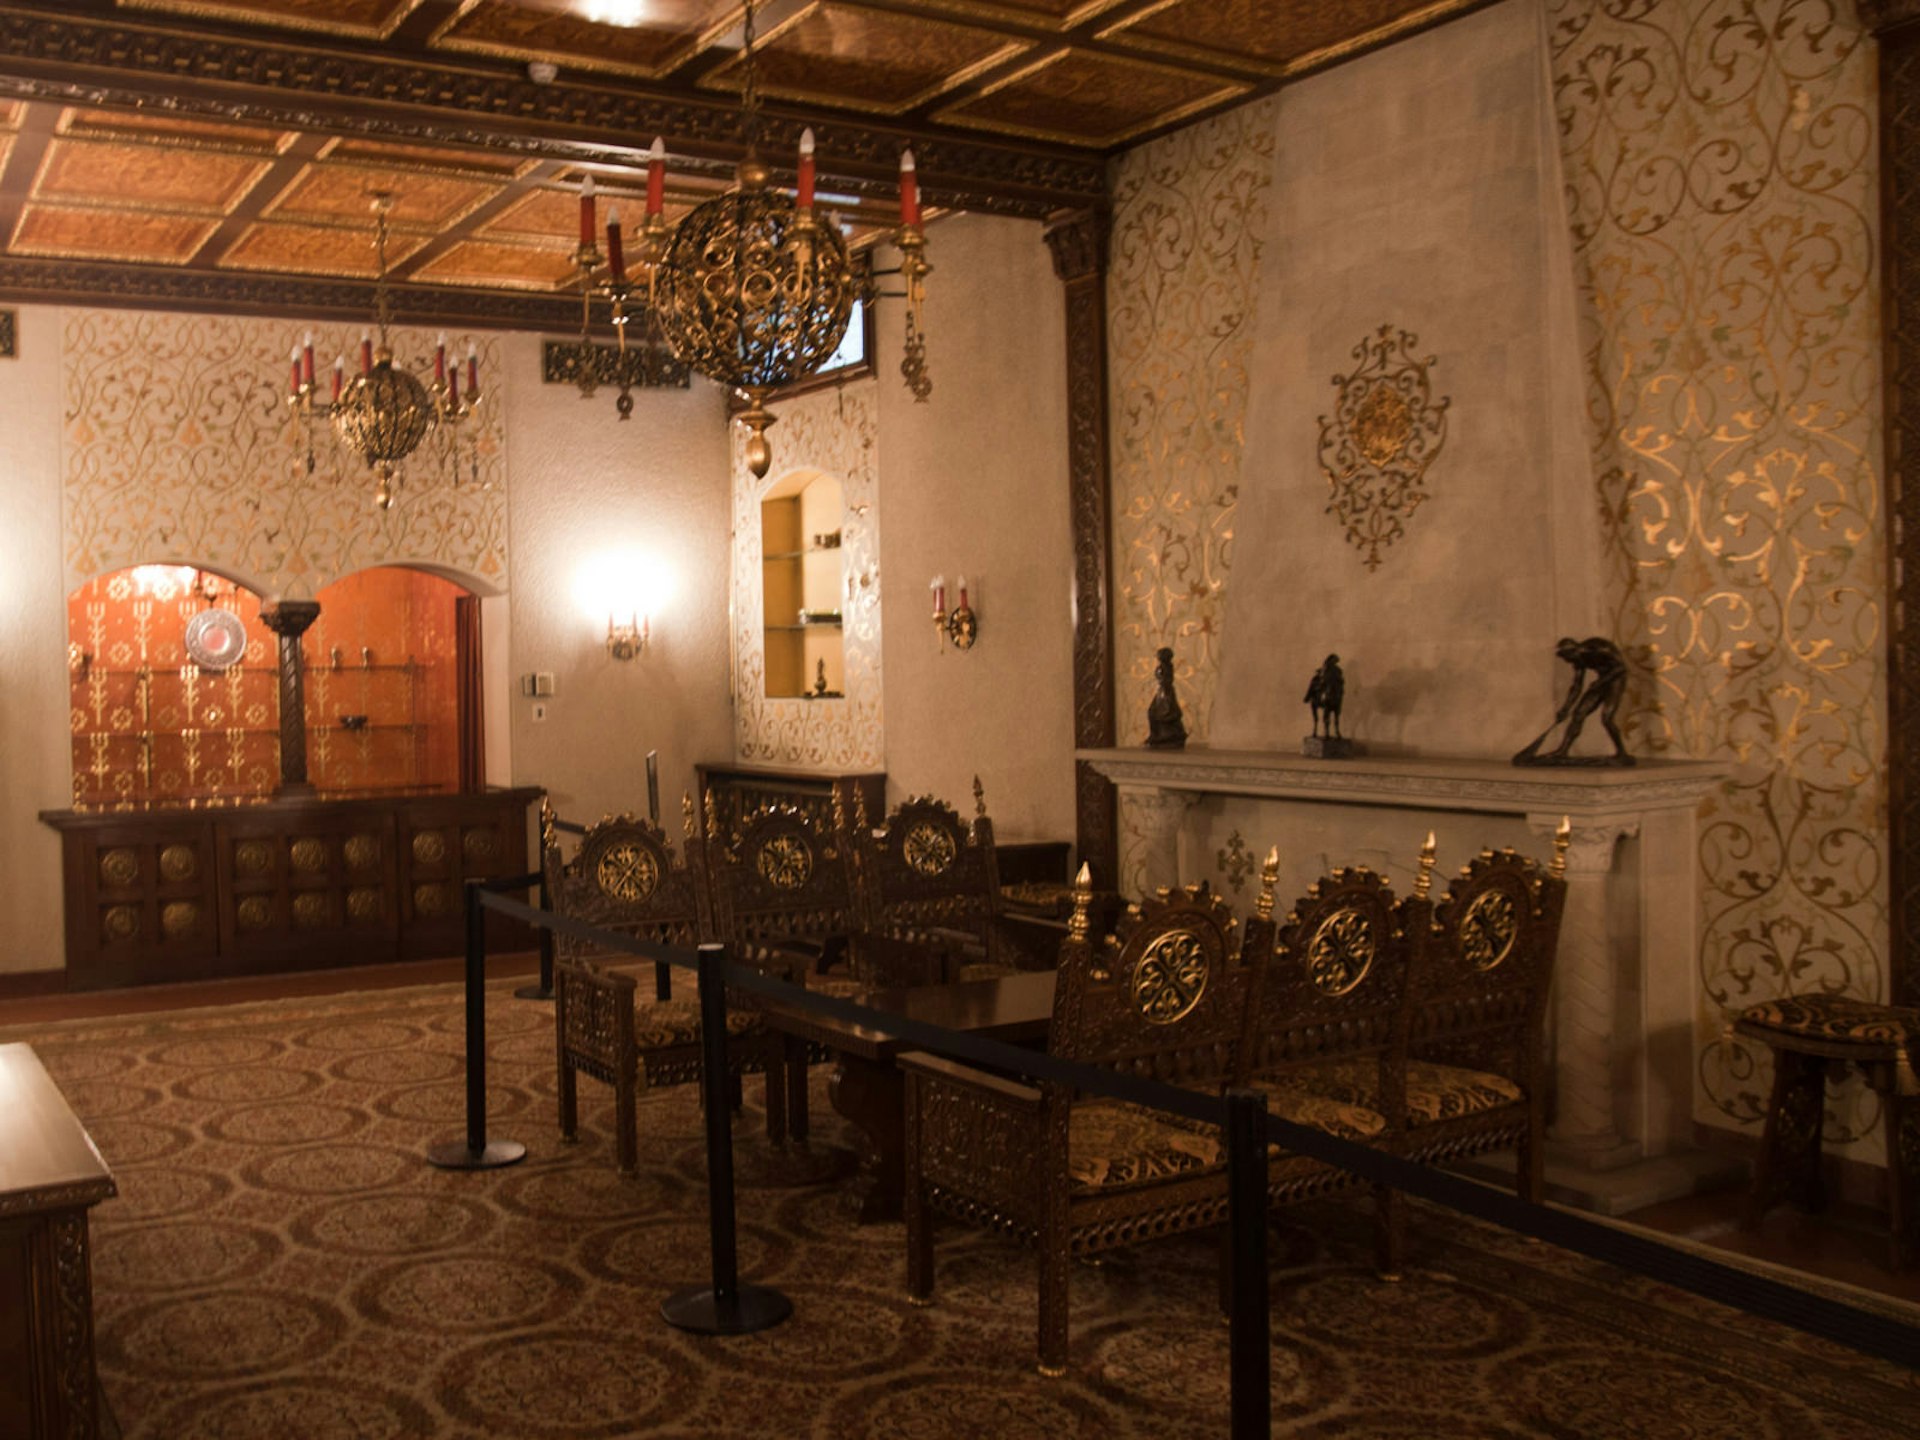 One of the Spring Palace's many lavish rooms © Kit Gillet / Lonely Planet